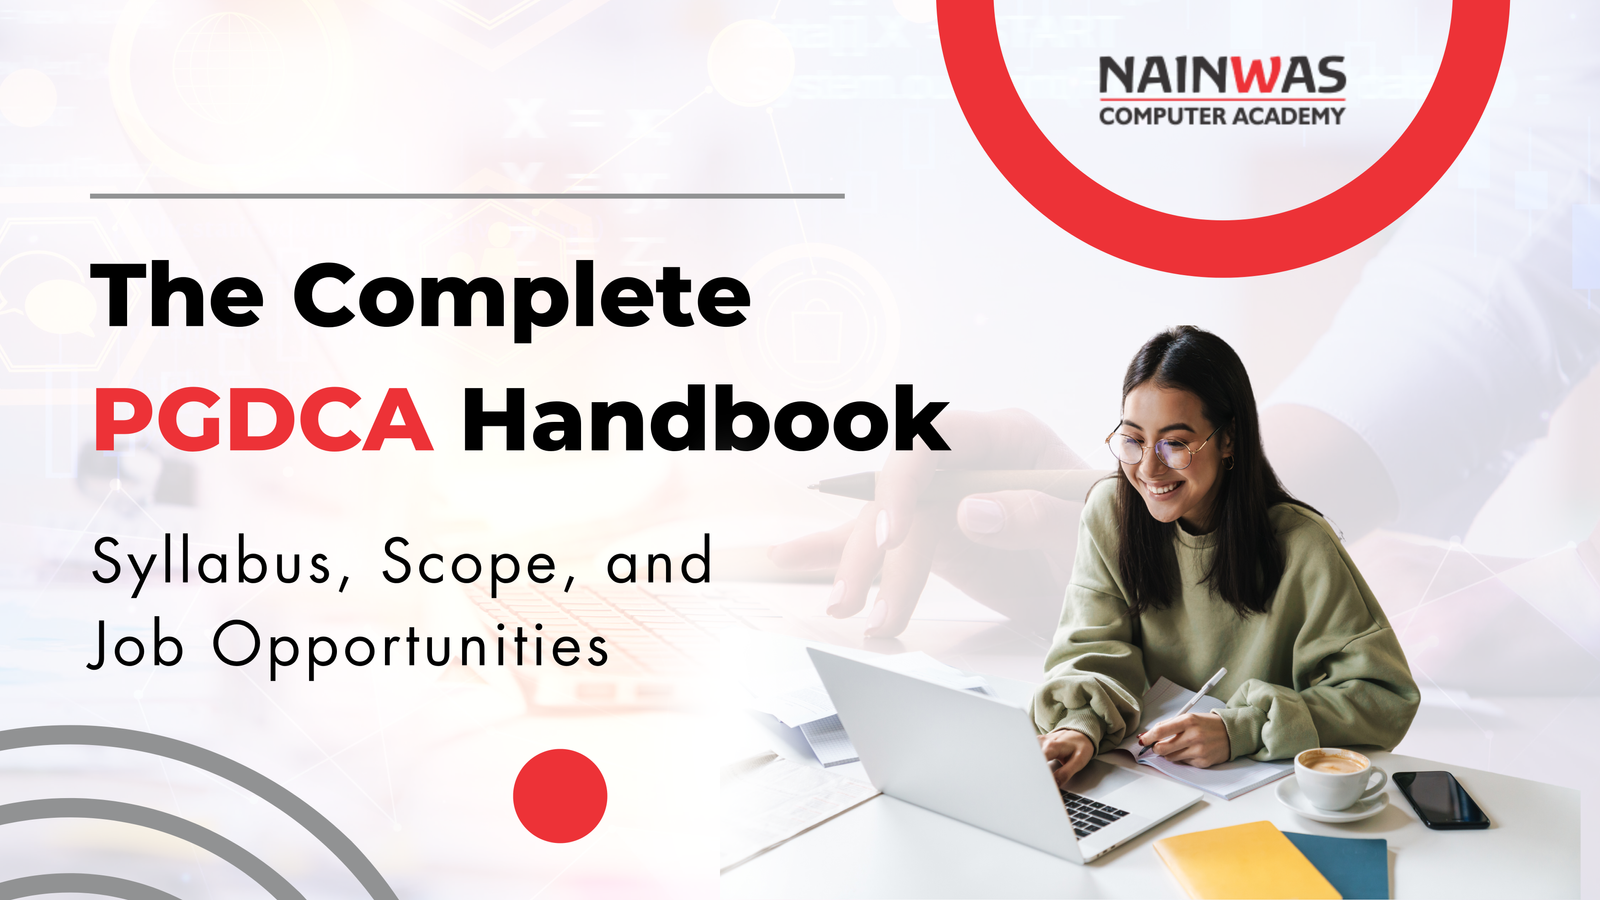 The Complete Handbook for PGDCA Course: Syllabus, Scope, and Job Opportunities